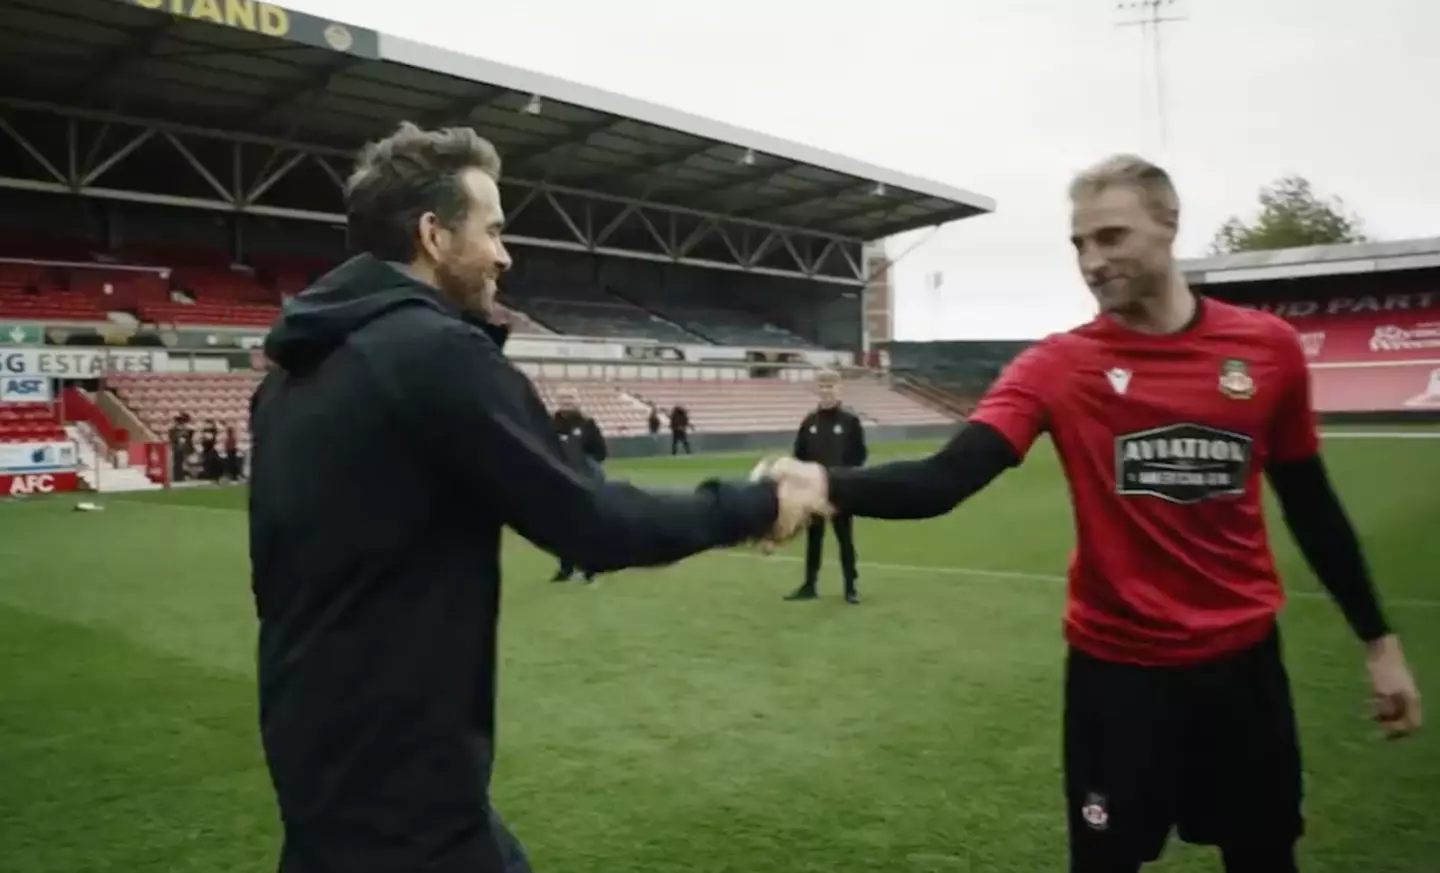 Ryan Reynolds is a co-owner of Wrexham AFC.